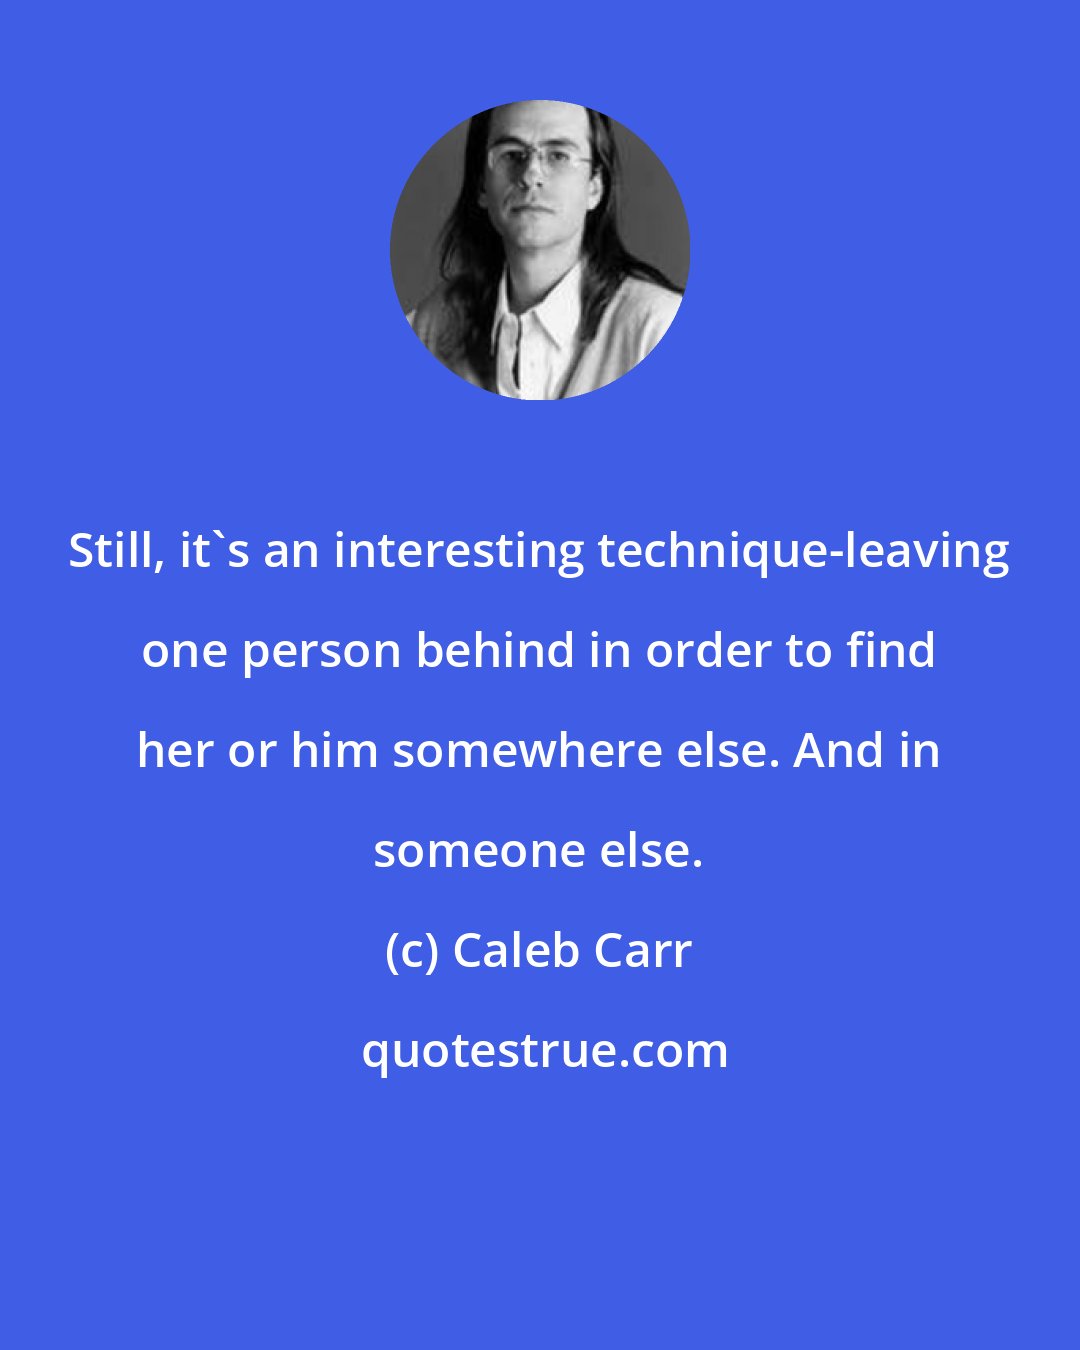 Caleb Carr: Still, it's an interesting technique-leaving one person behind in order to find her or him somewhere else. And in someone else.